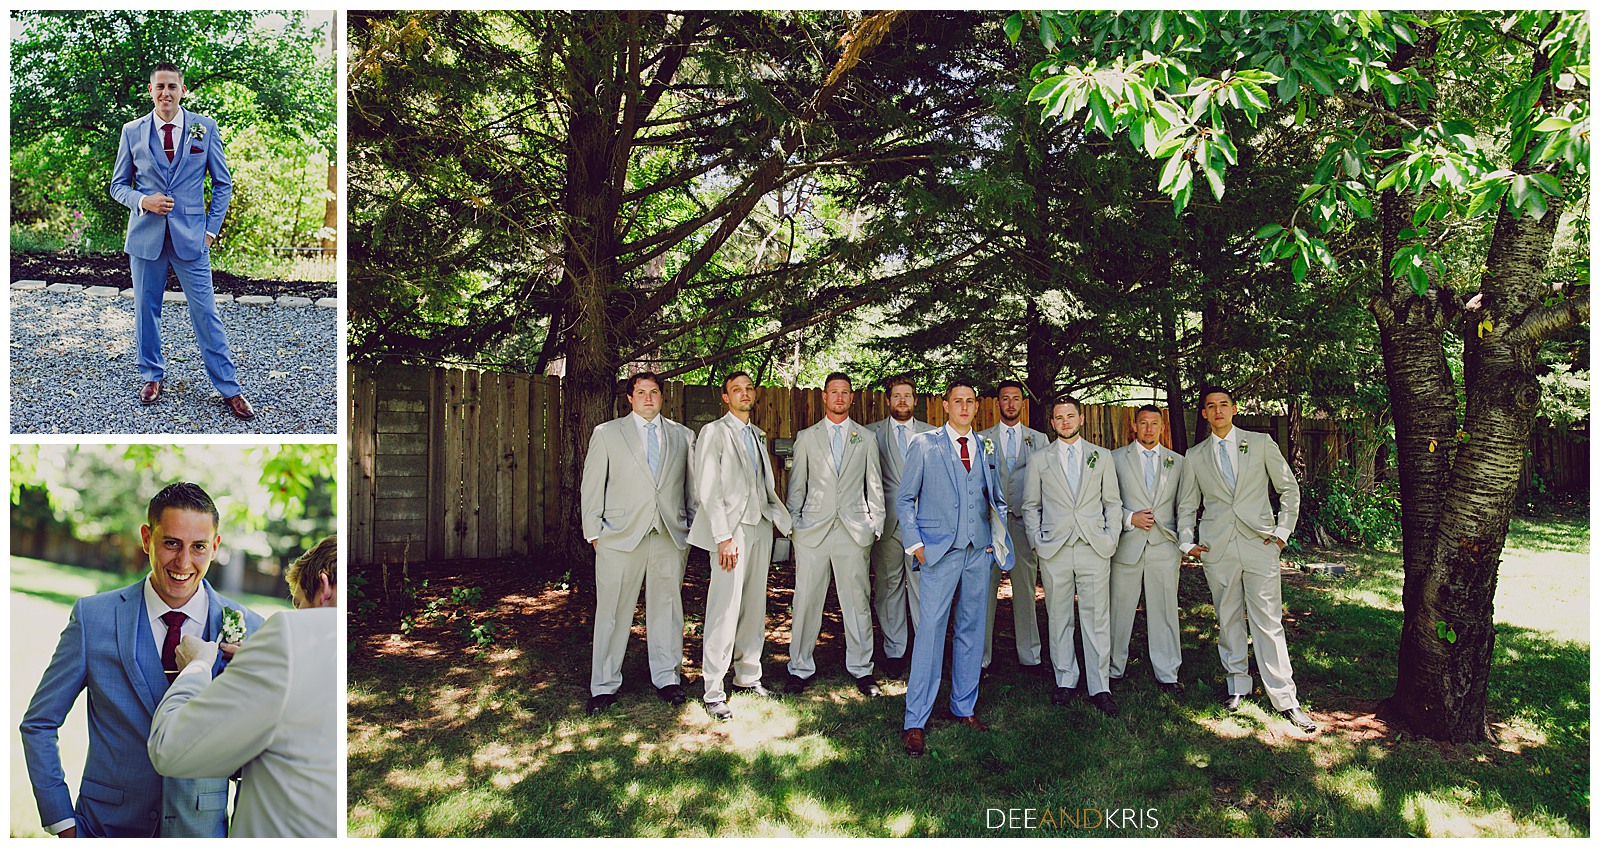 Dee and Kris photography at Mountain Shadows resort, Blue groom suit